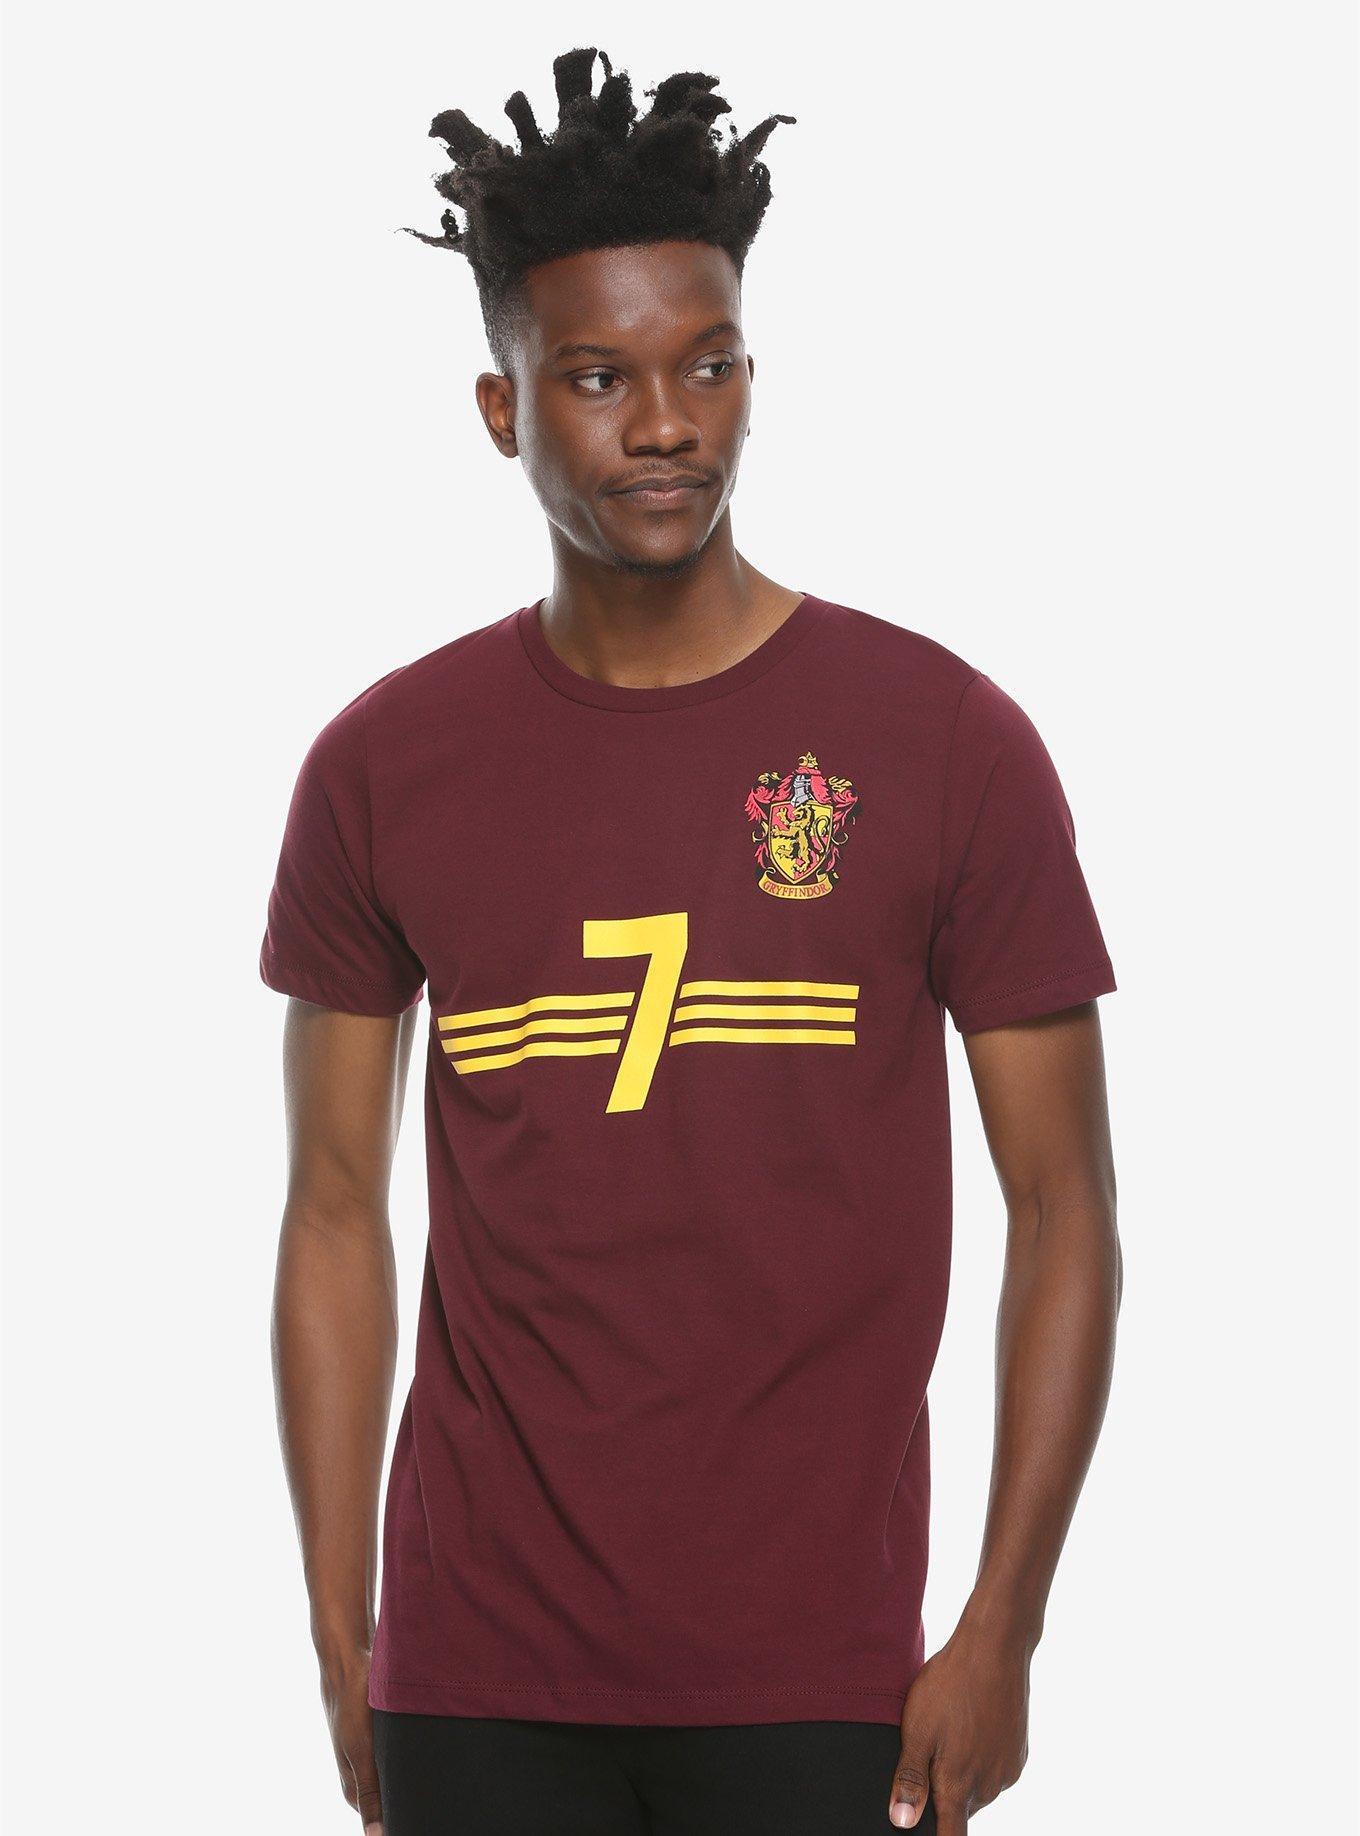 T-Shirt Topic Jersey | Harry Hot Potter Quidditch